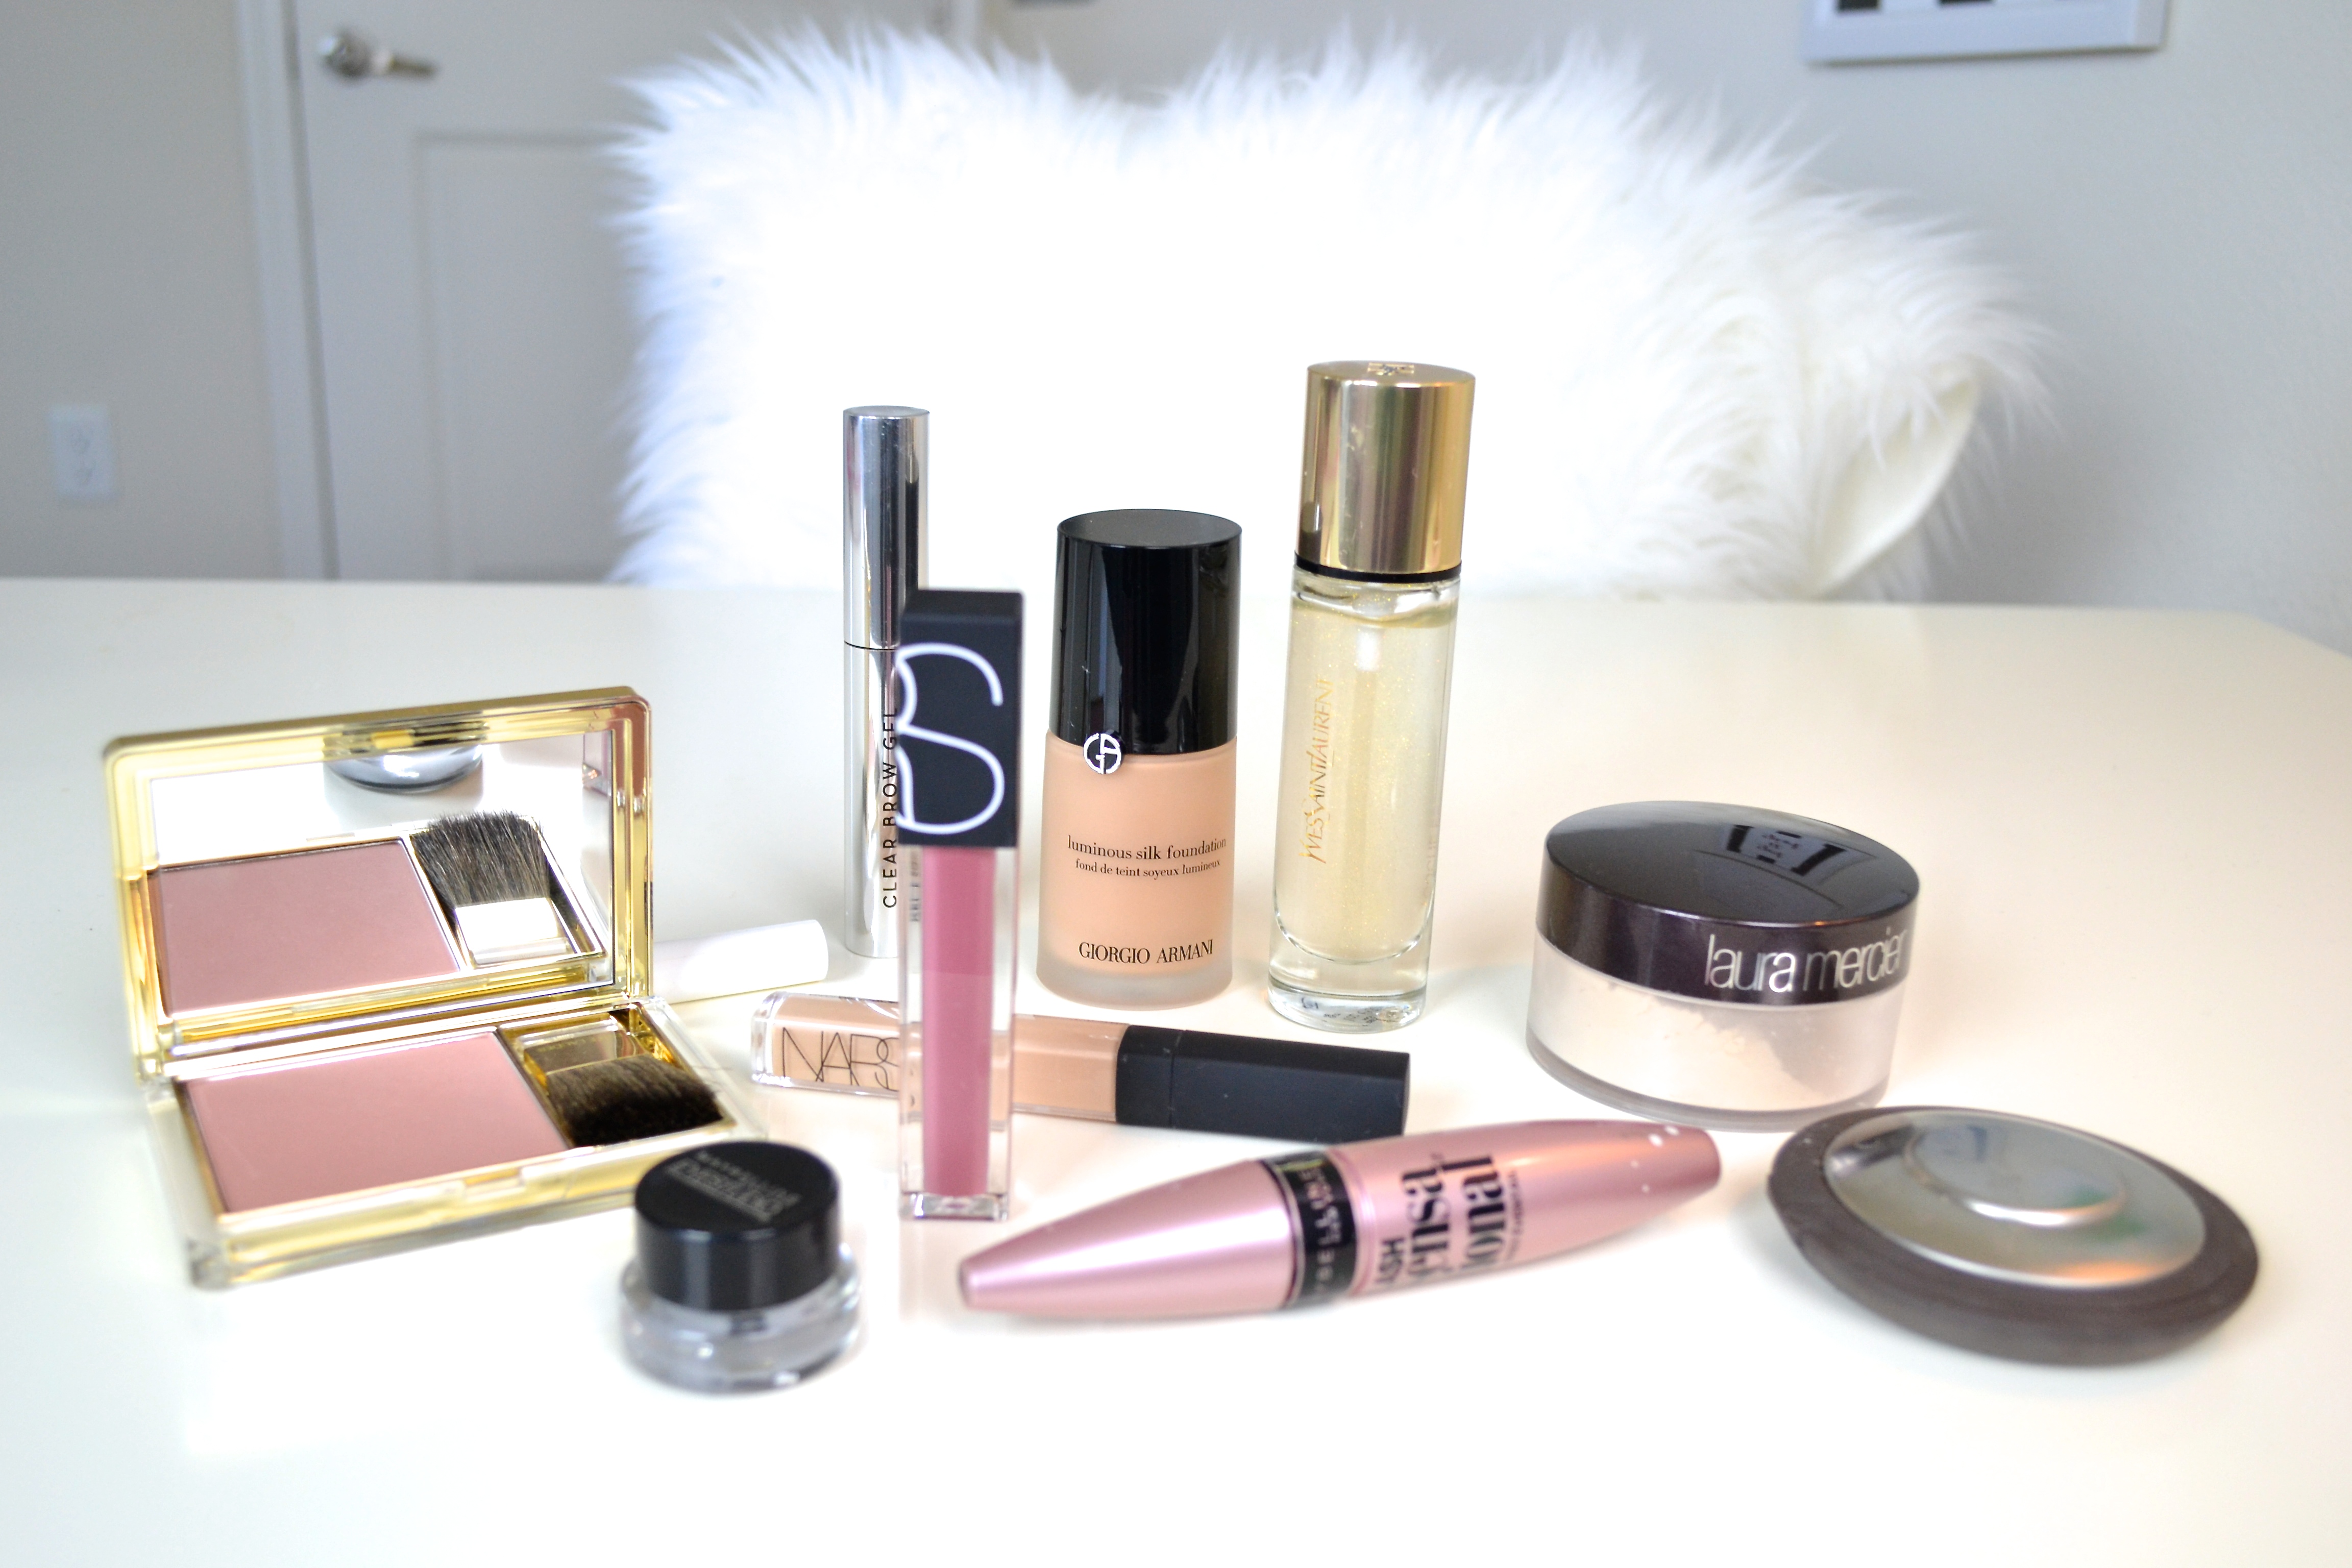 High End Makeup Products and Makeup Look on Glam Life Living